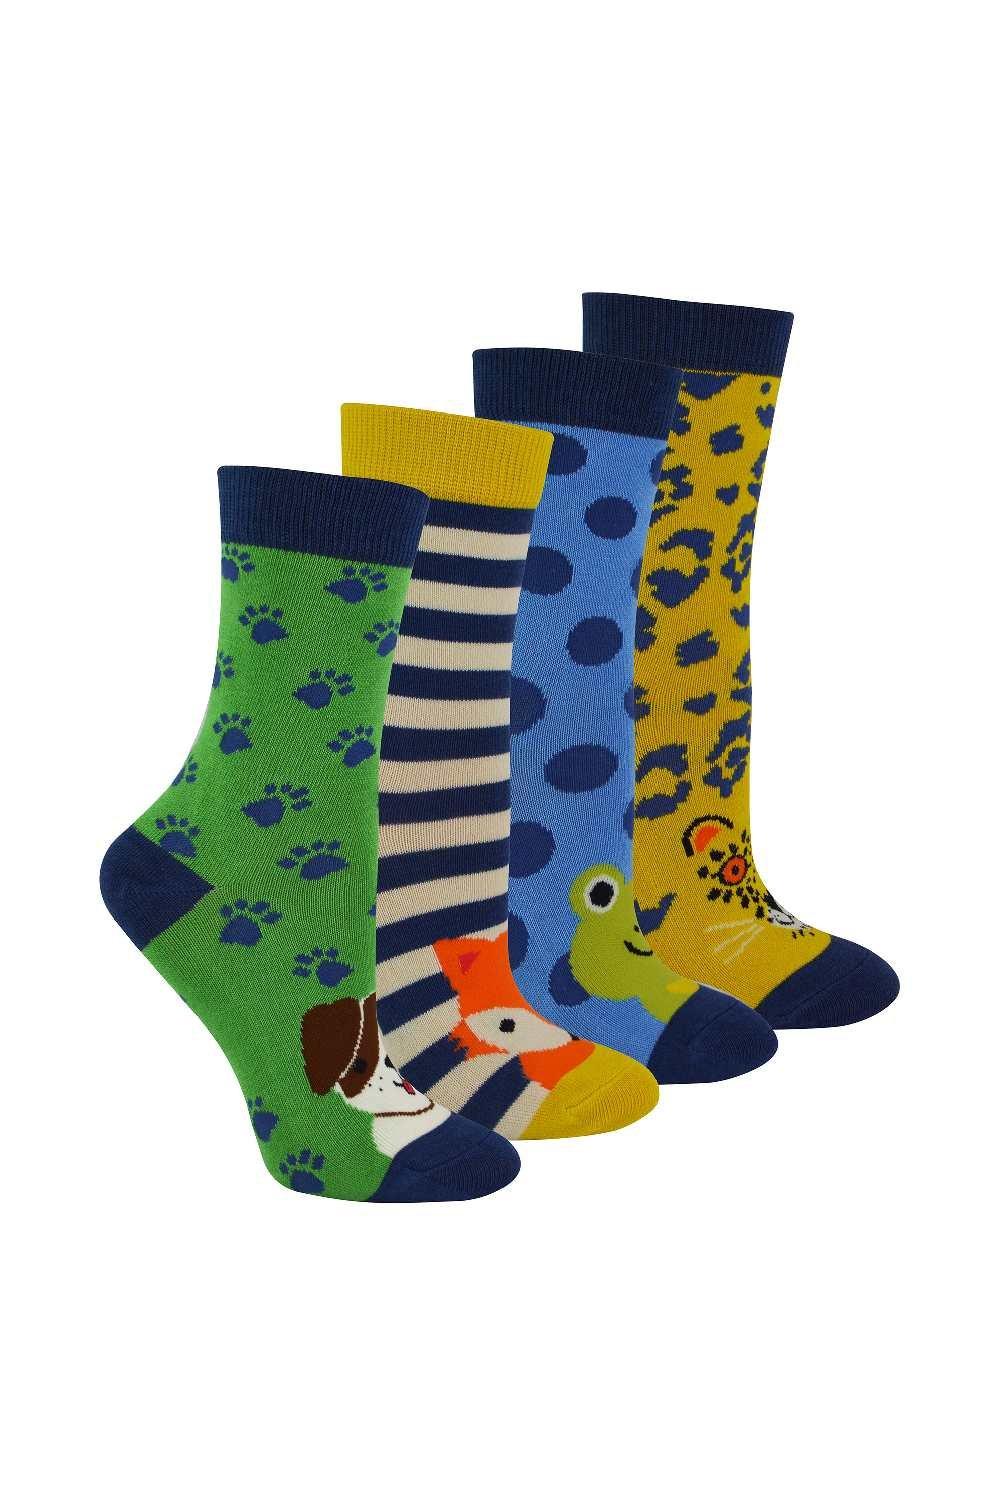 4 Pack Novelty Animal Pattern Bamboo Socks in a Gift Box